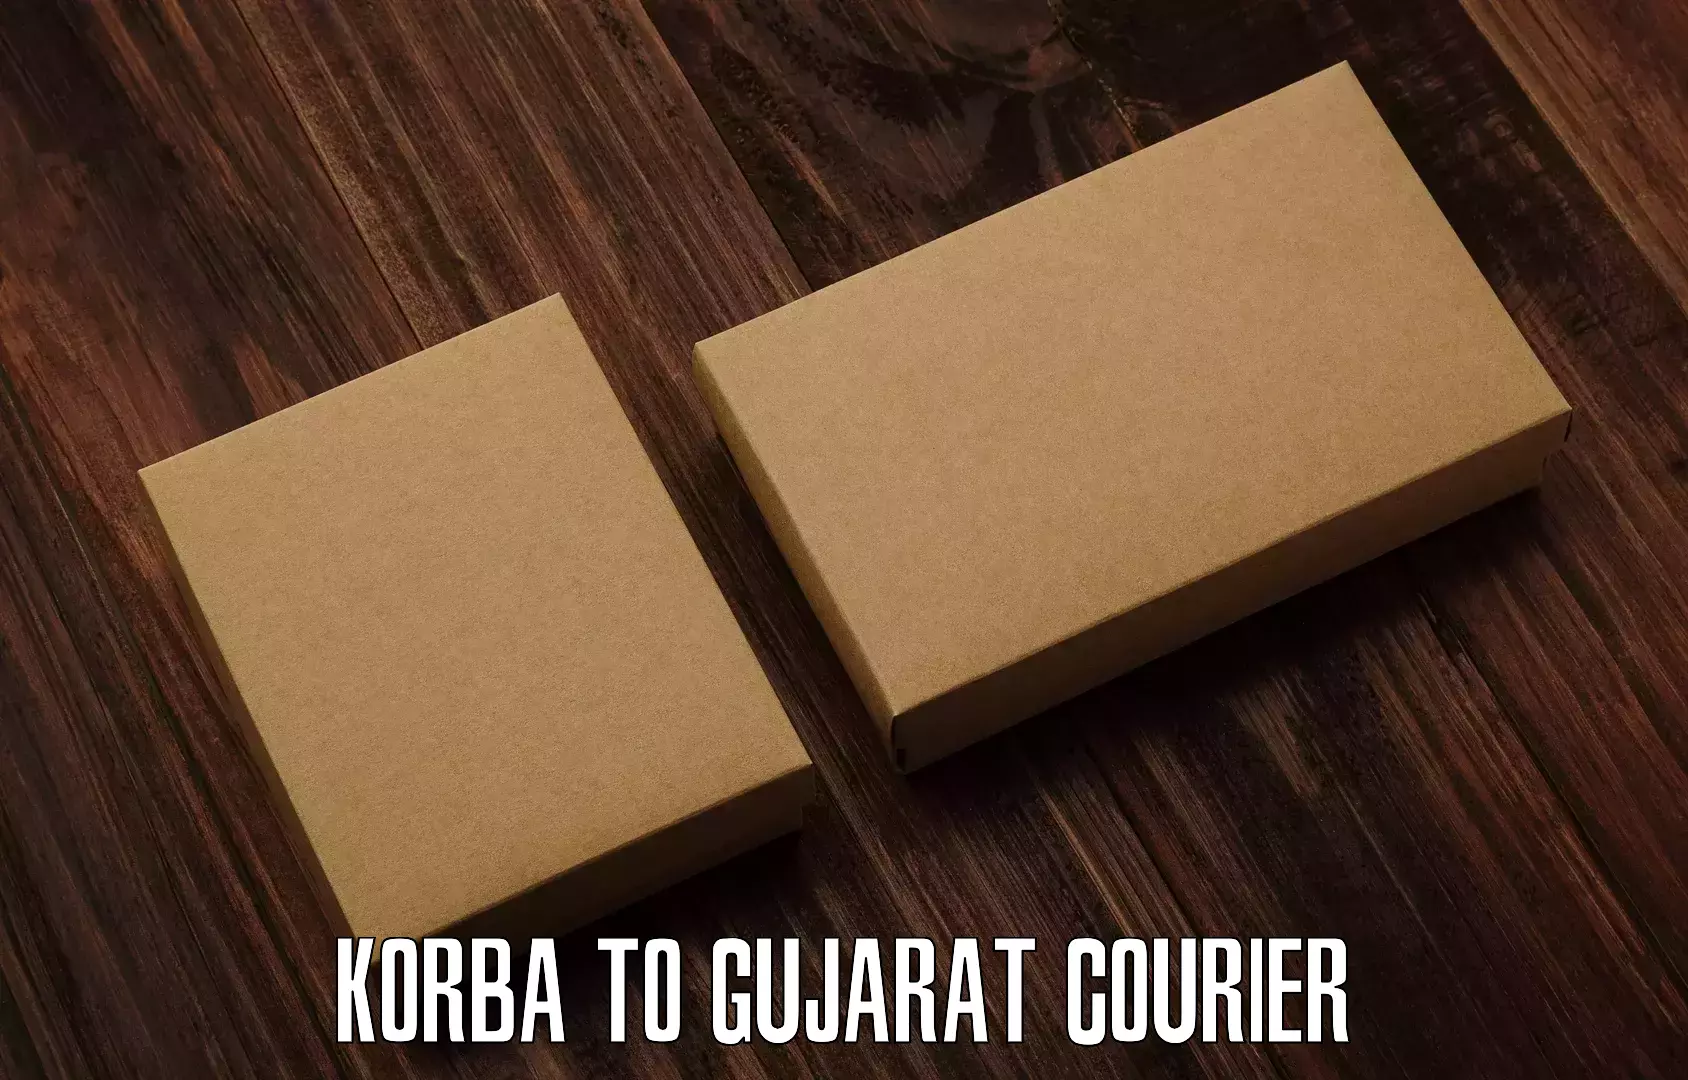 Next-day delivery options Korba to Nadiad